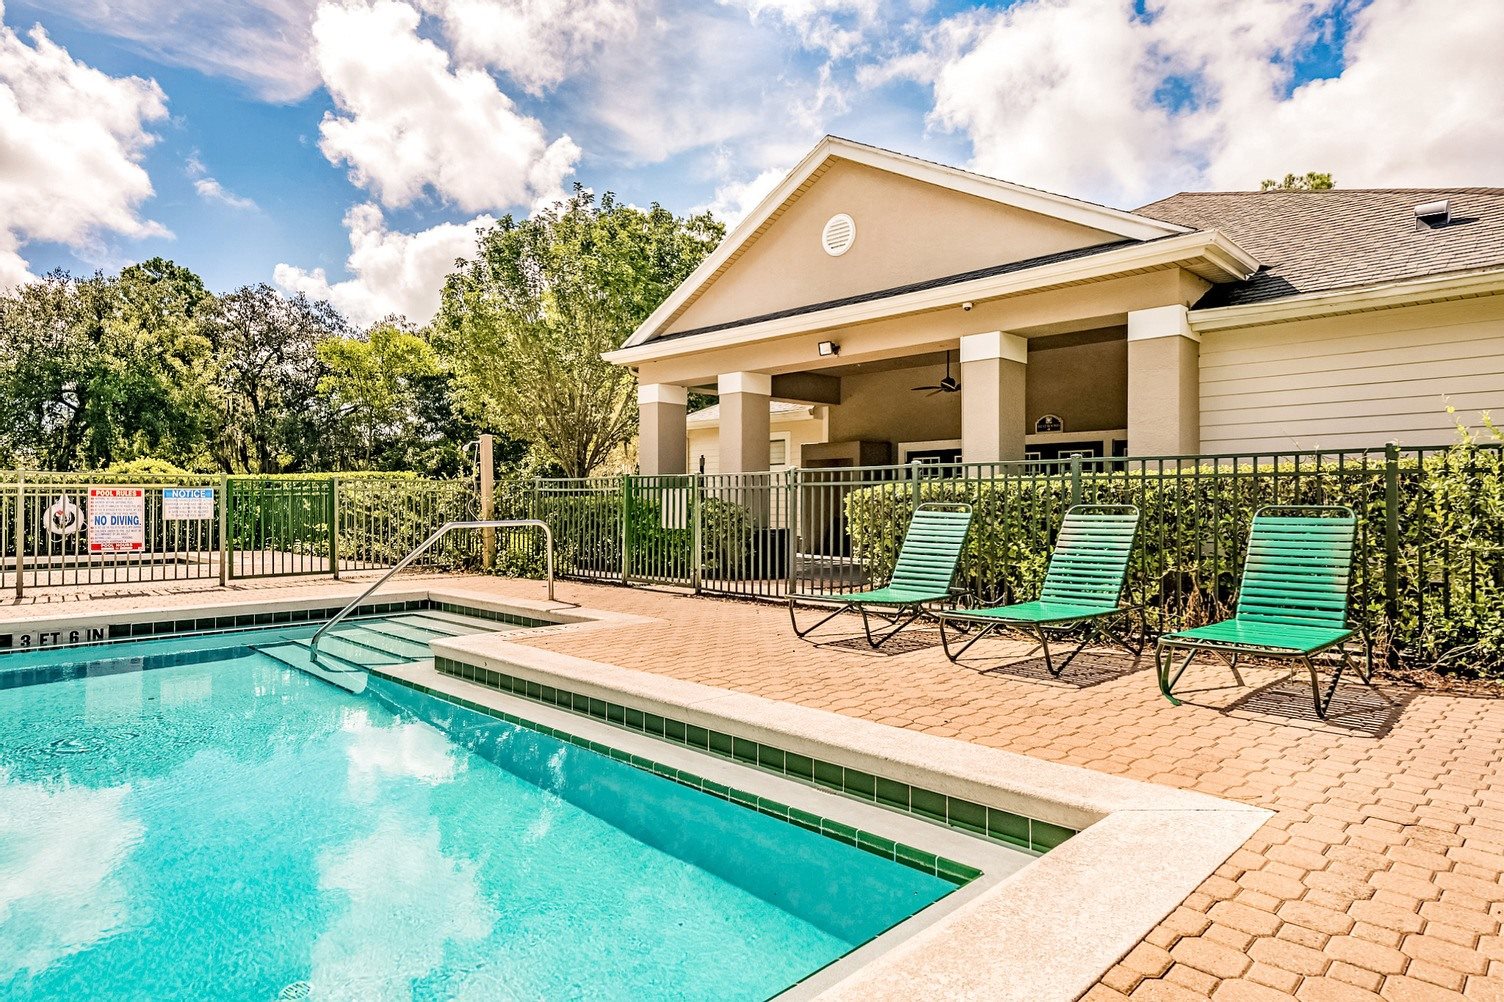 Swimming pool with a brick paver sundeck and lounge chairs outside the clubhouse.